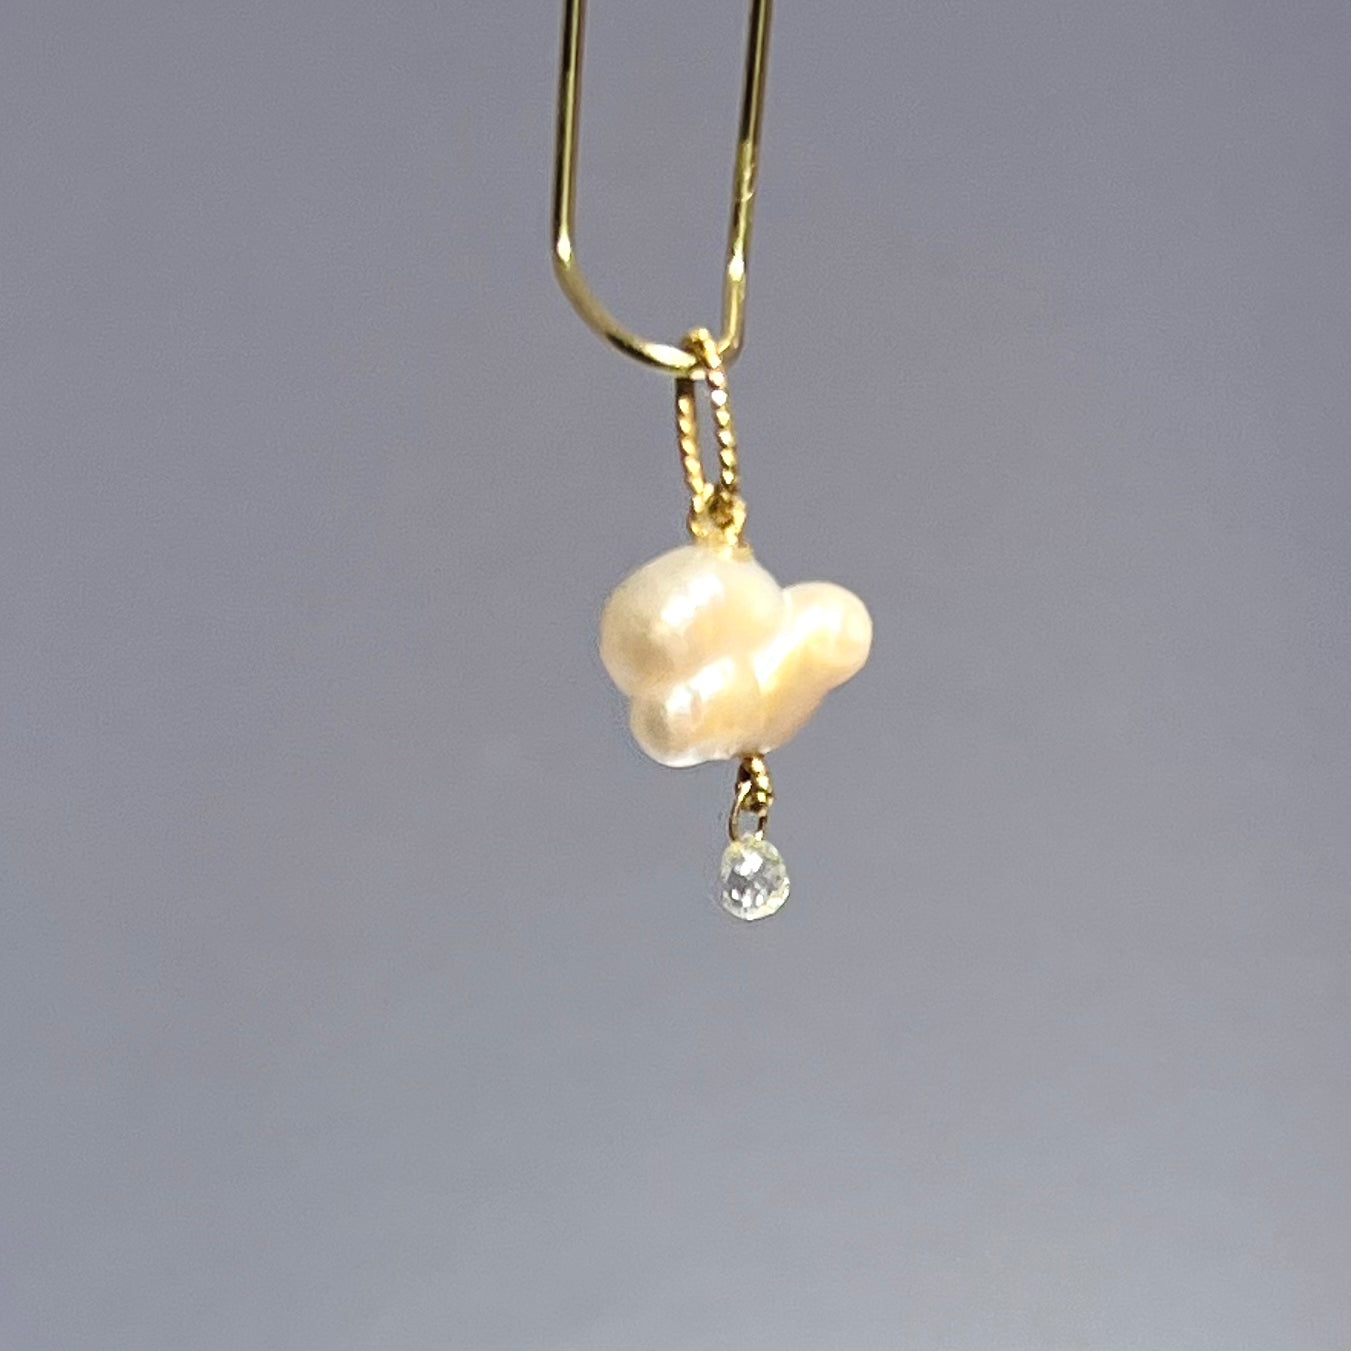 Japanese Pearl and Briolette Diamond Cloud Charm